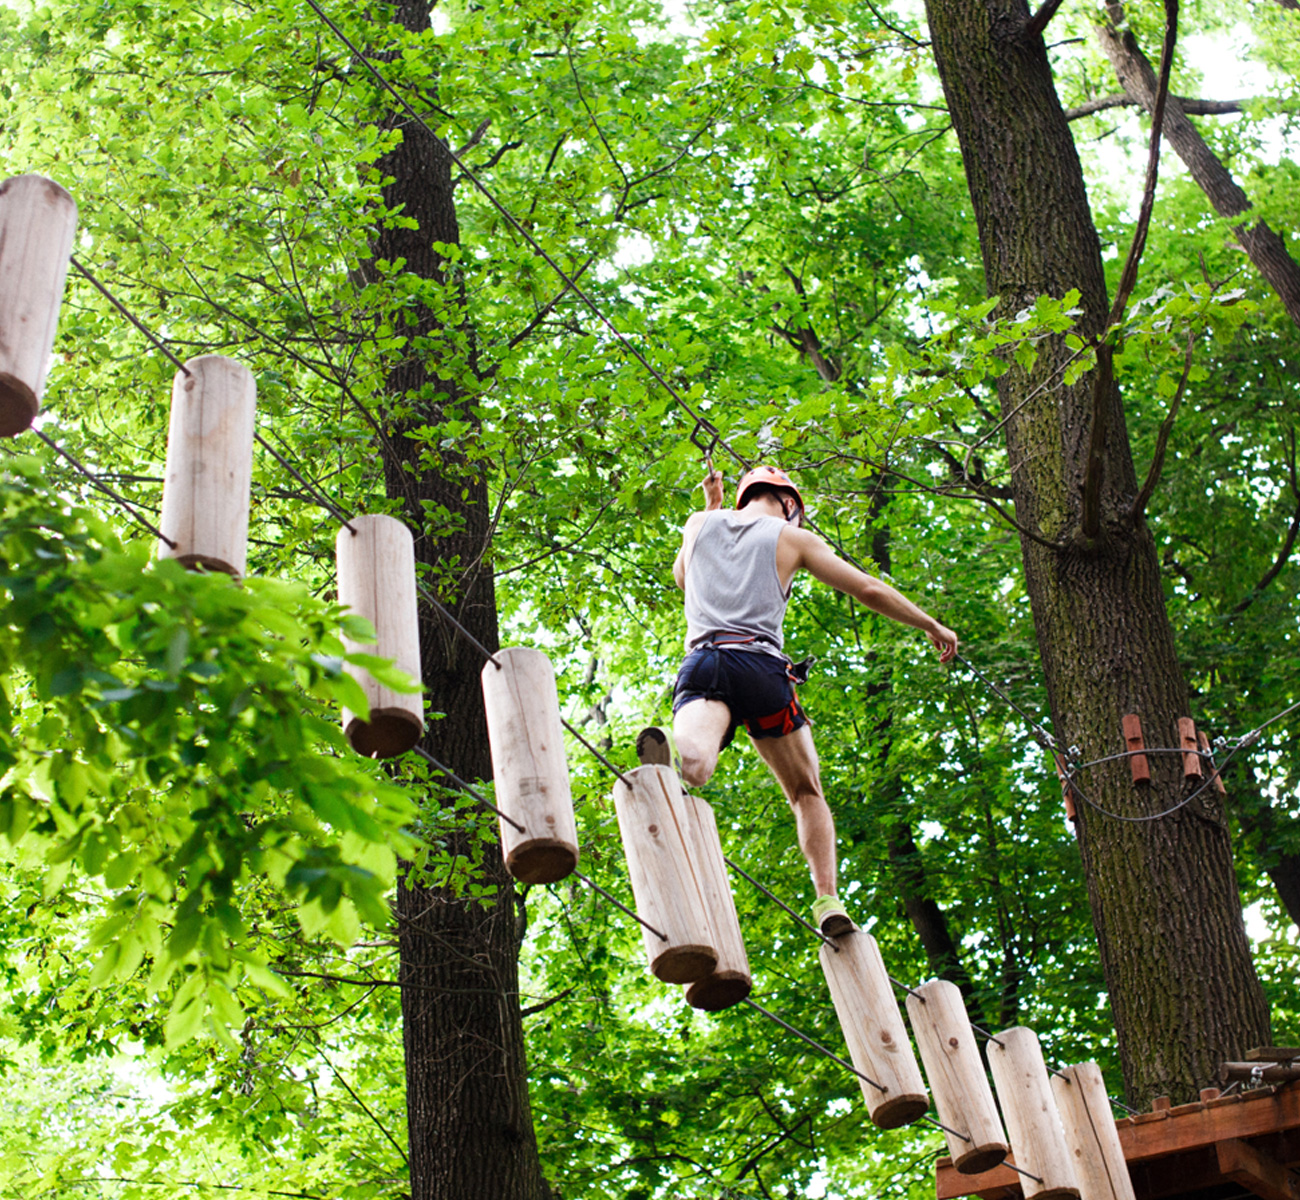 Experience the high ropes course at Jollywood, an adventure resort in Bangalore for Day Outing